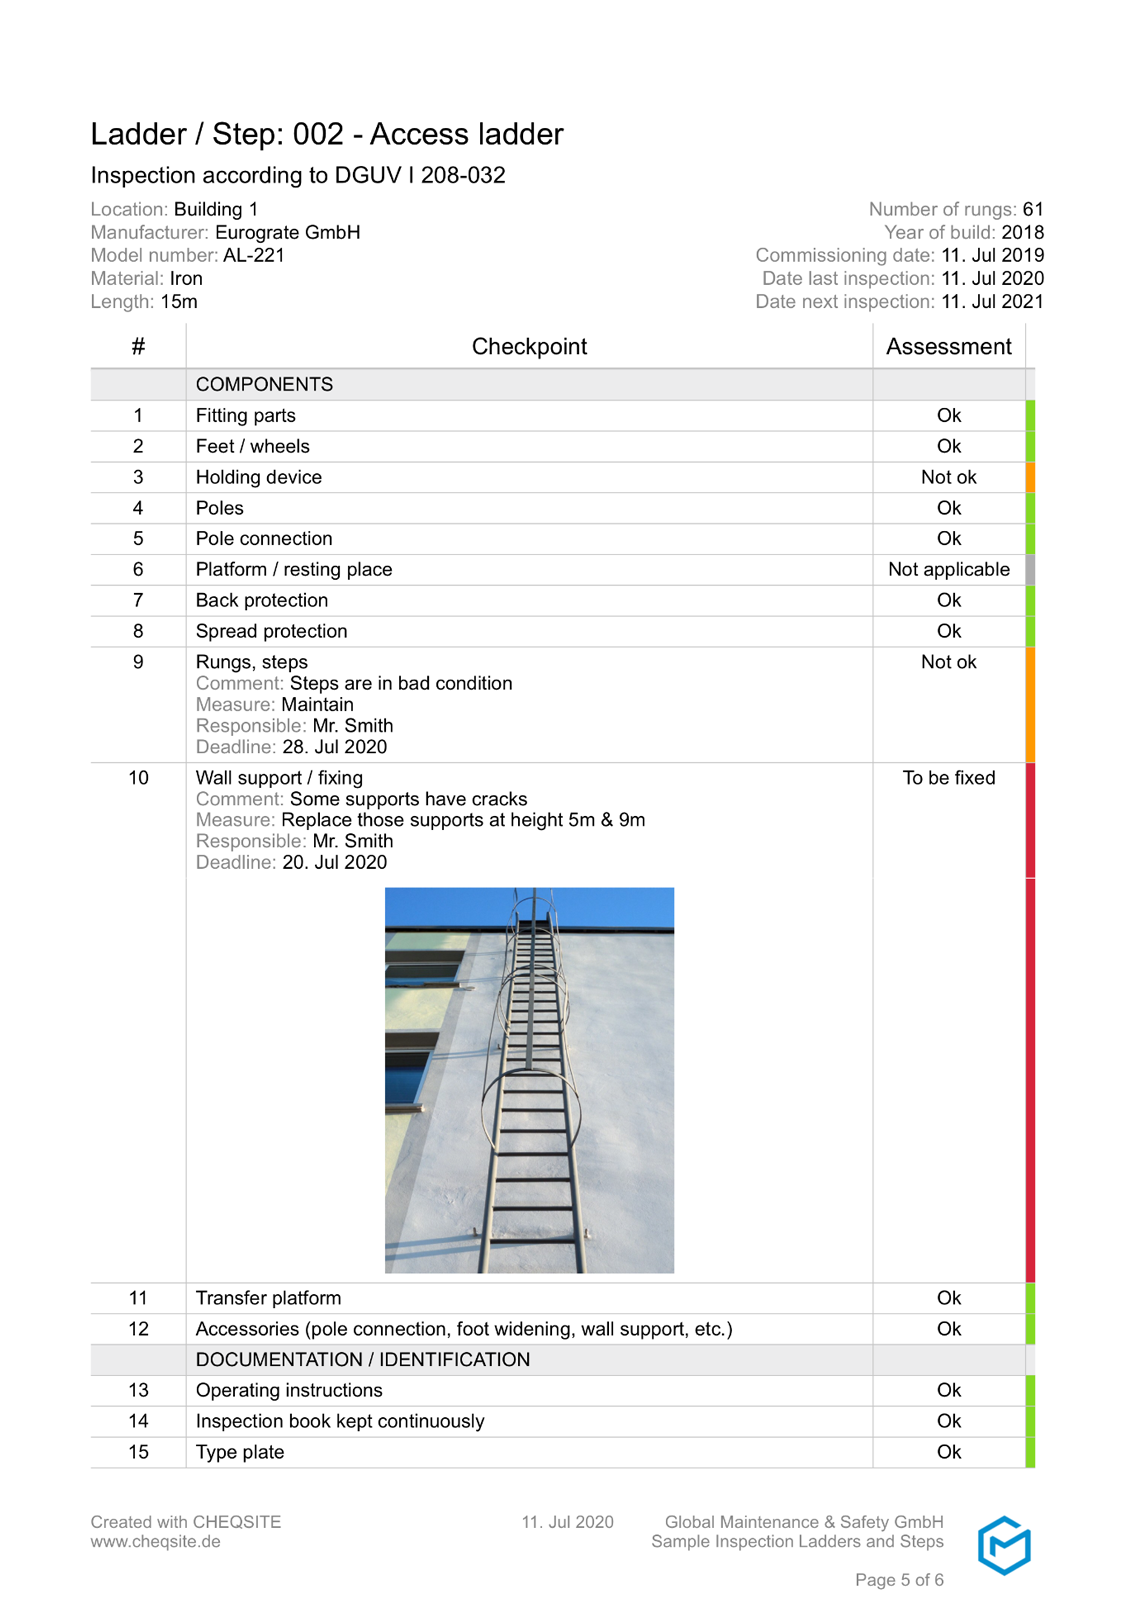 Ladders and Steps Sample Template Checklist